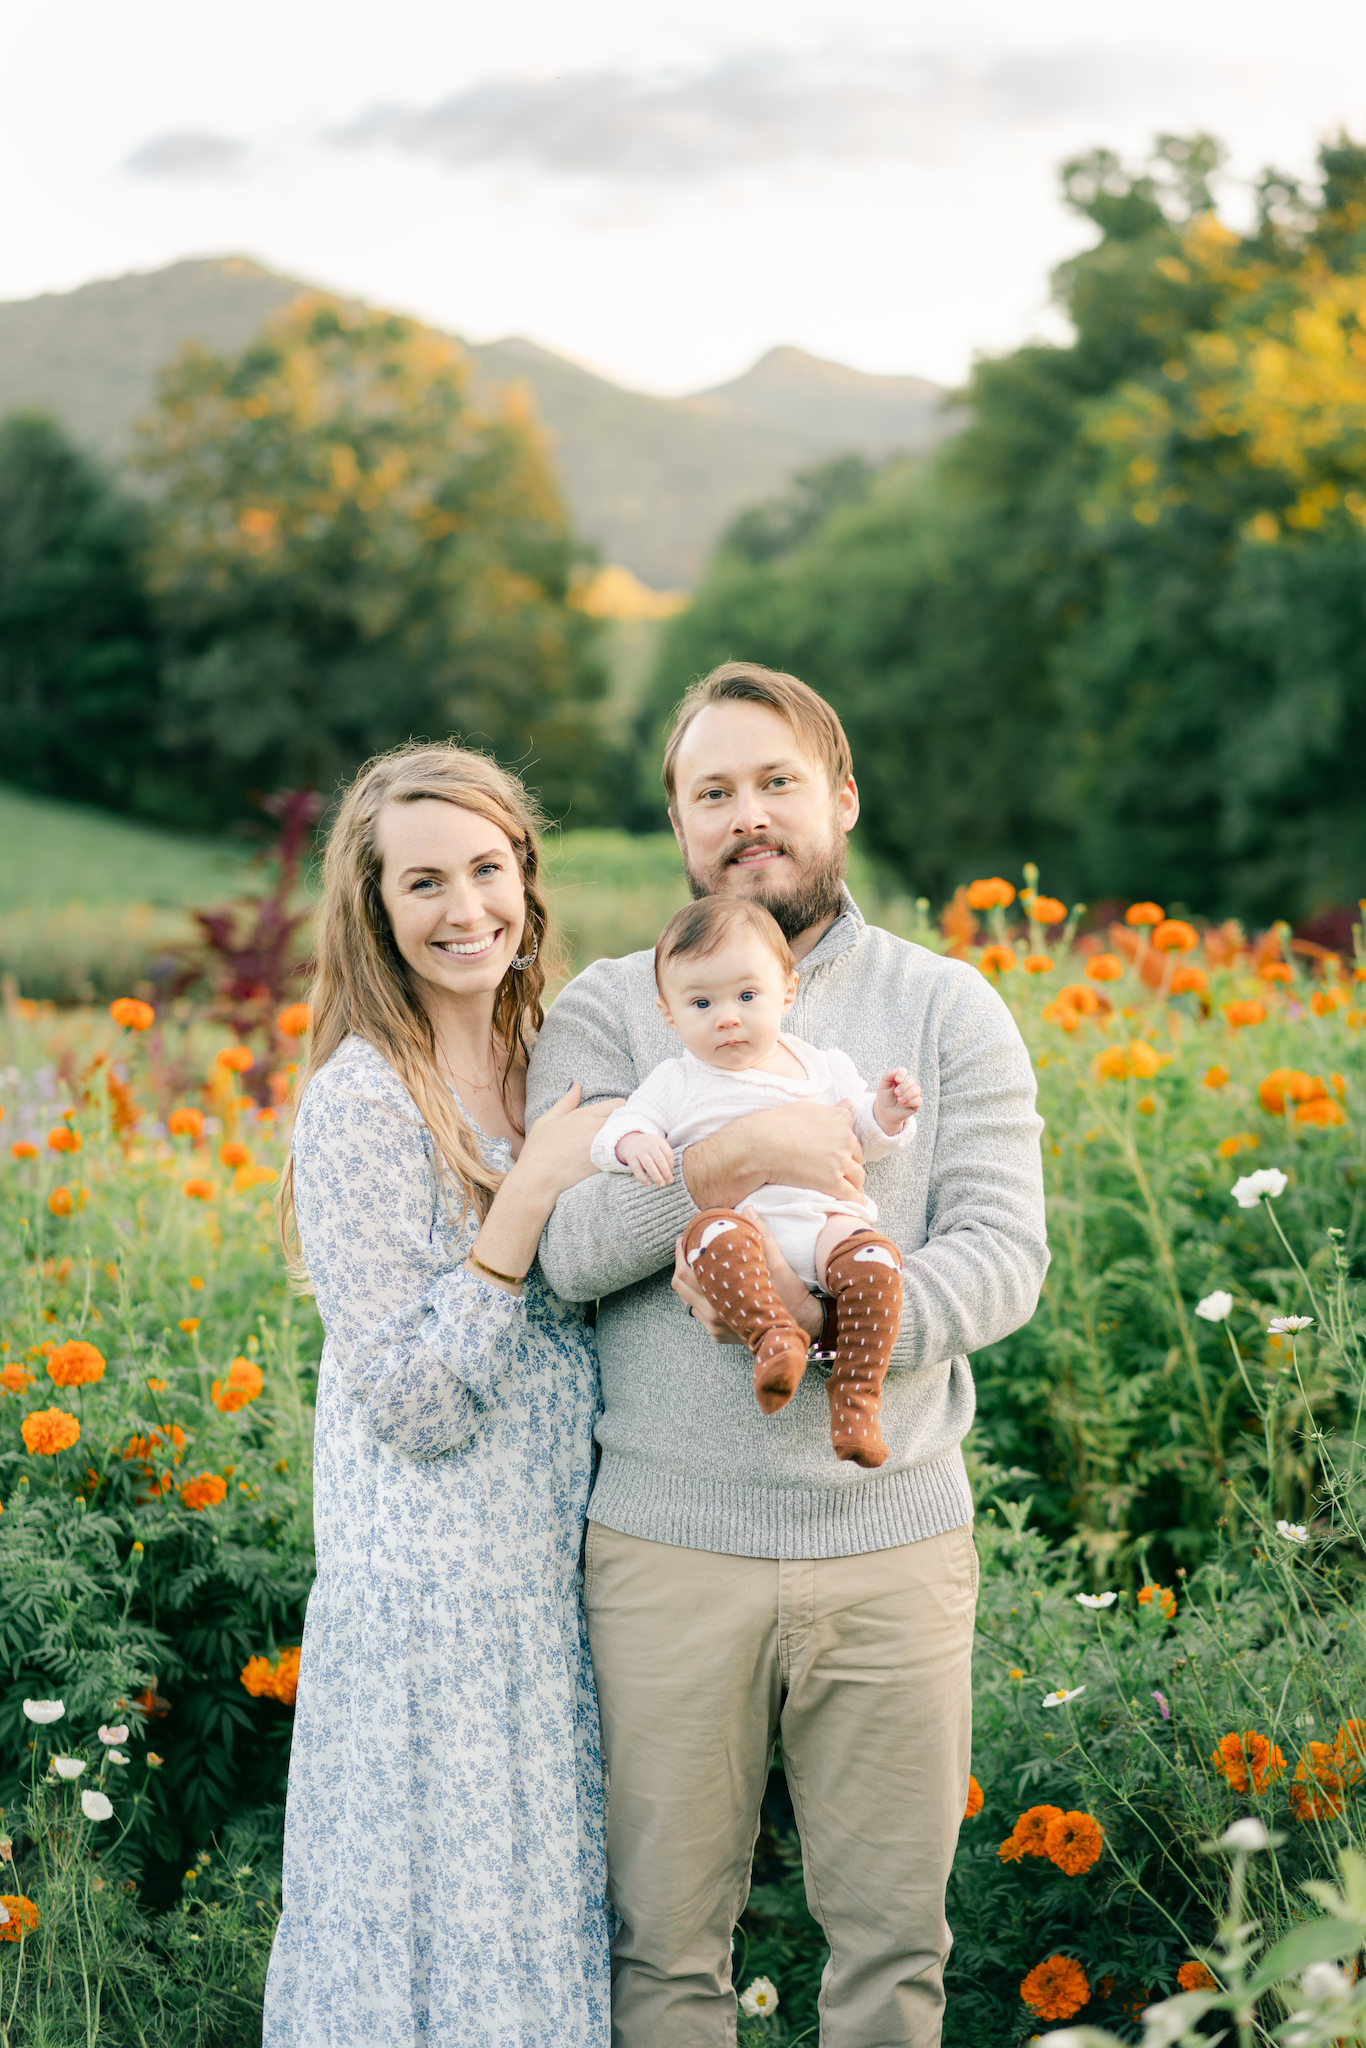 Mom, dad and baby smiling at the camera in Asheville NC flower field. Photo by Lauren Sosler Photography.